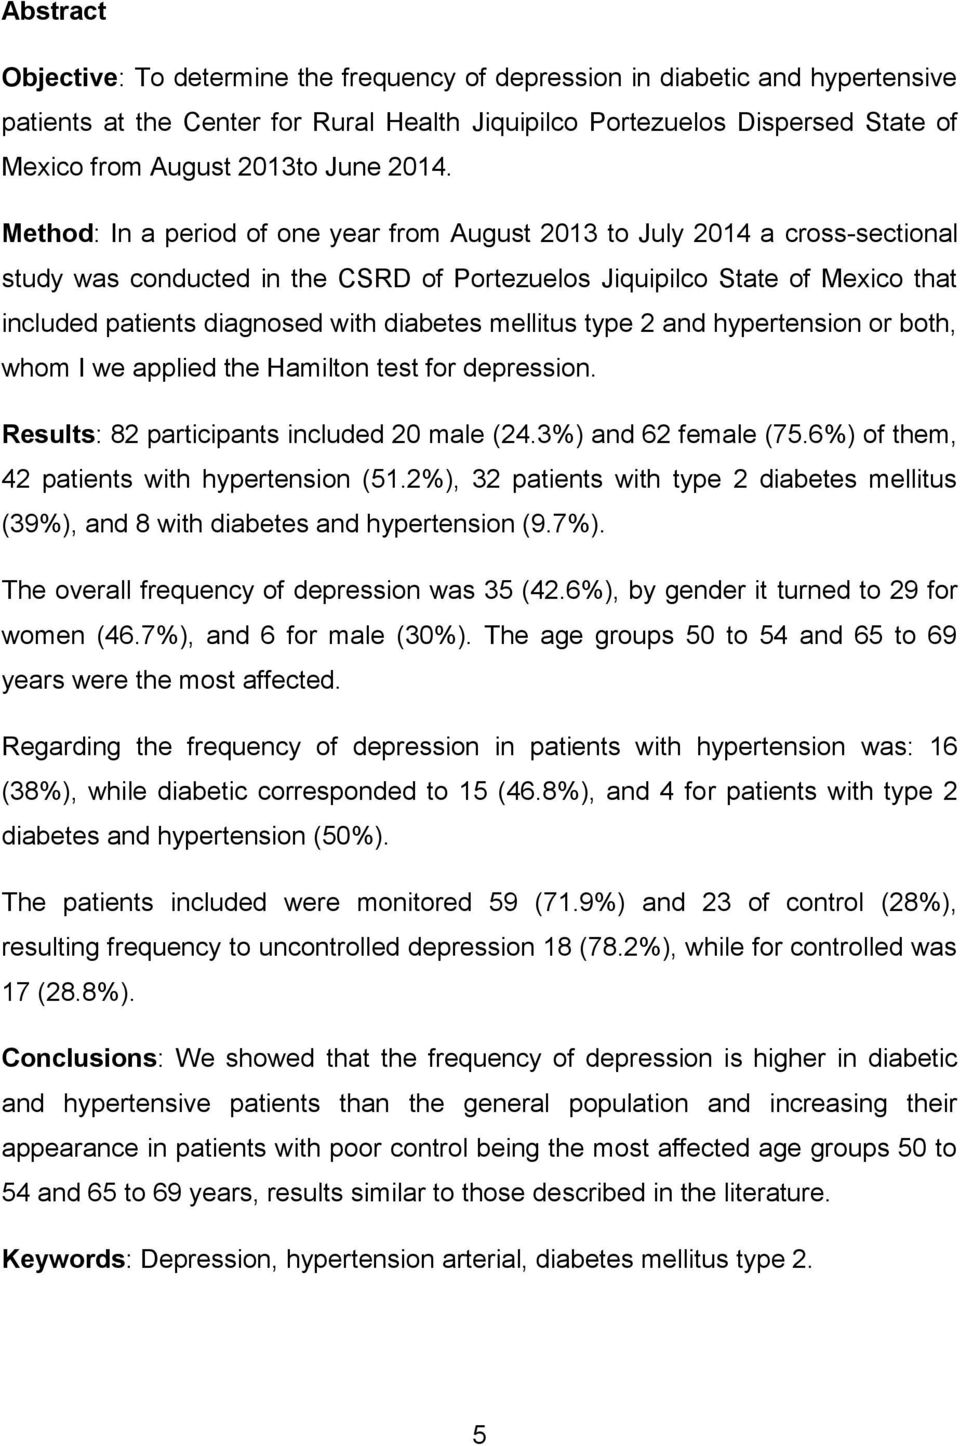 Method: In a period of one year from August 2013 to July 2014 a cross-sectional study was conducted in the CSRD of Portezuelos Jiquipilco State of Mexico that included patients diagnosed with